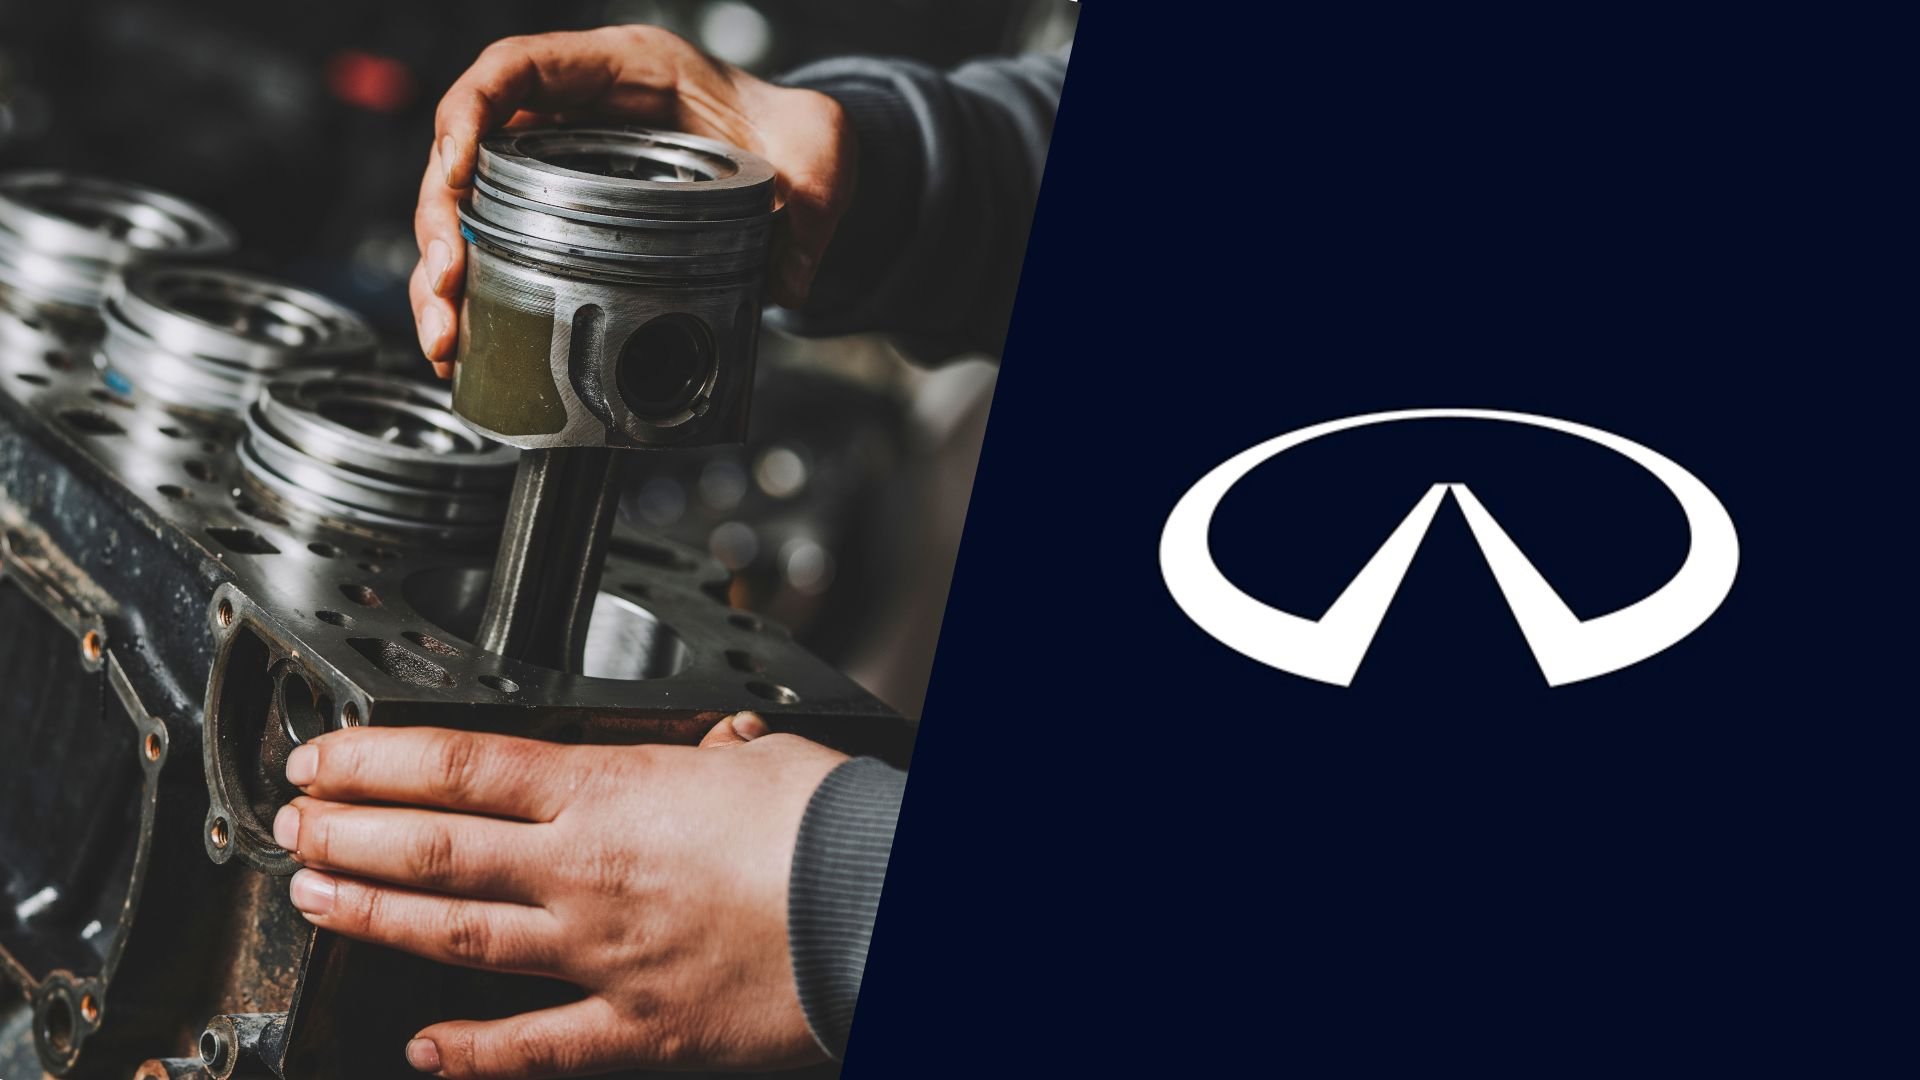 An infiniti logo with a man working on a car engine.